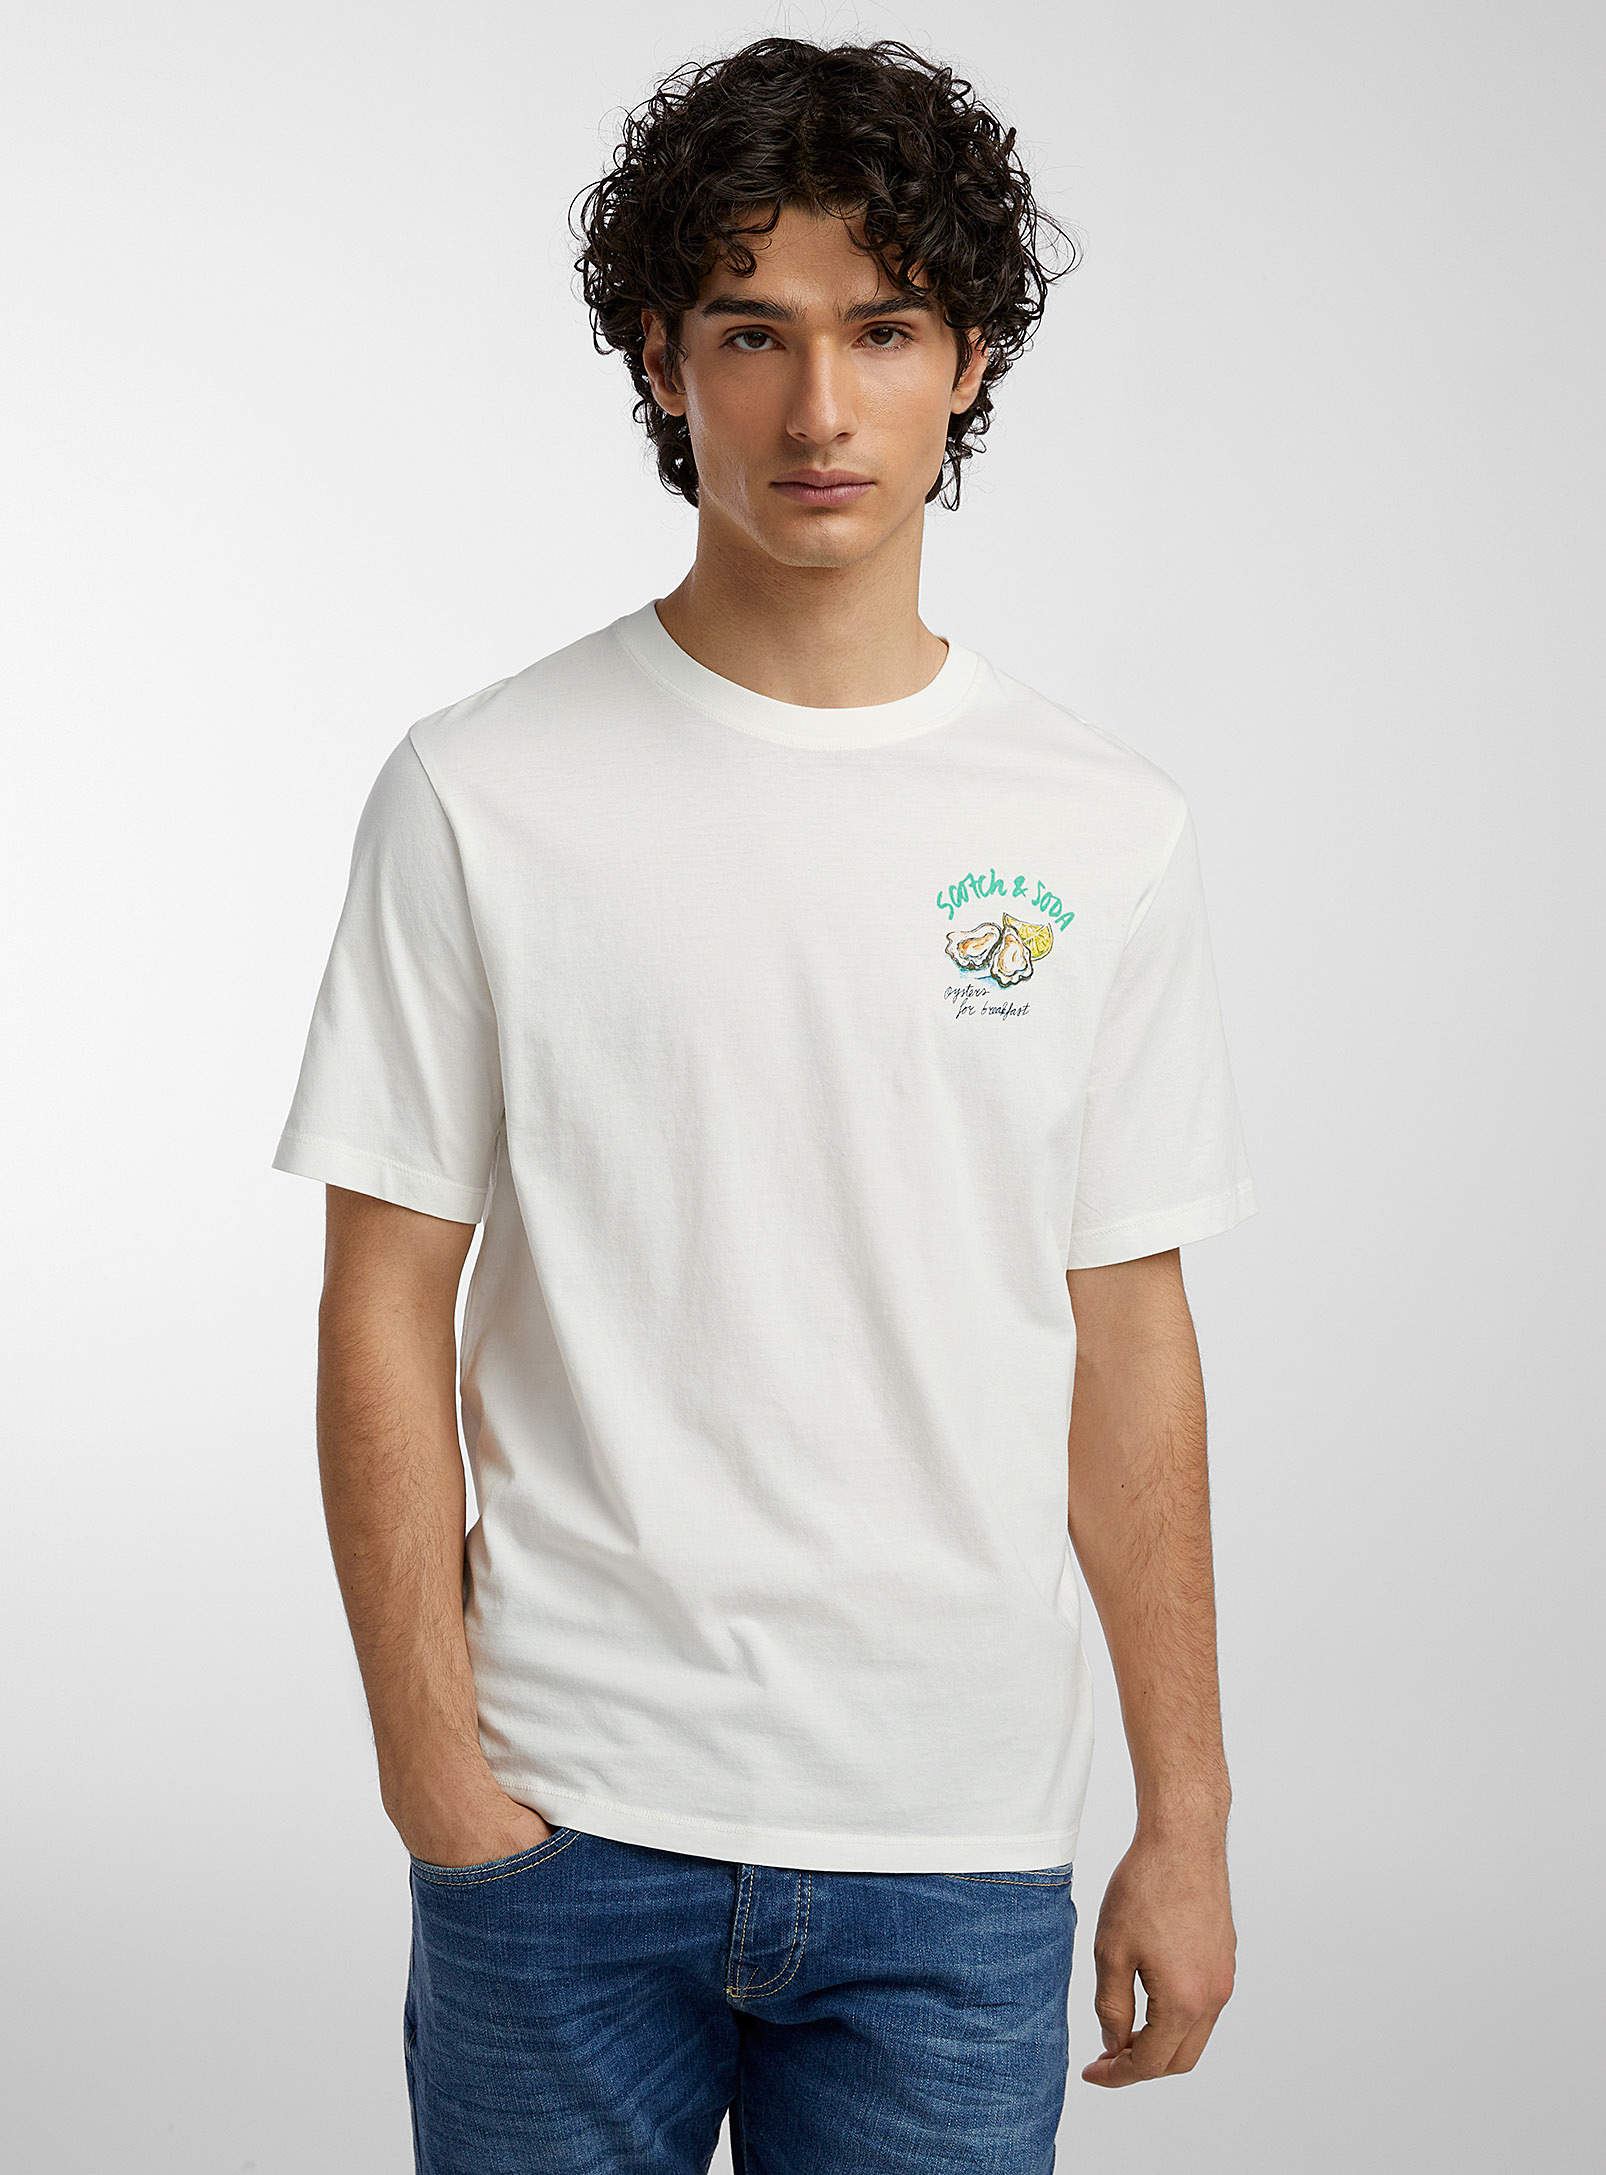 Scotch & Soda Oysters For Breakfast T-shirt In White